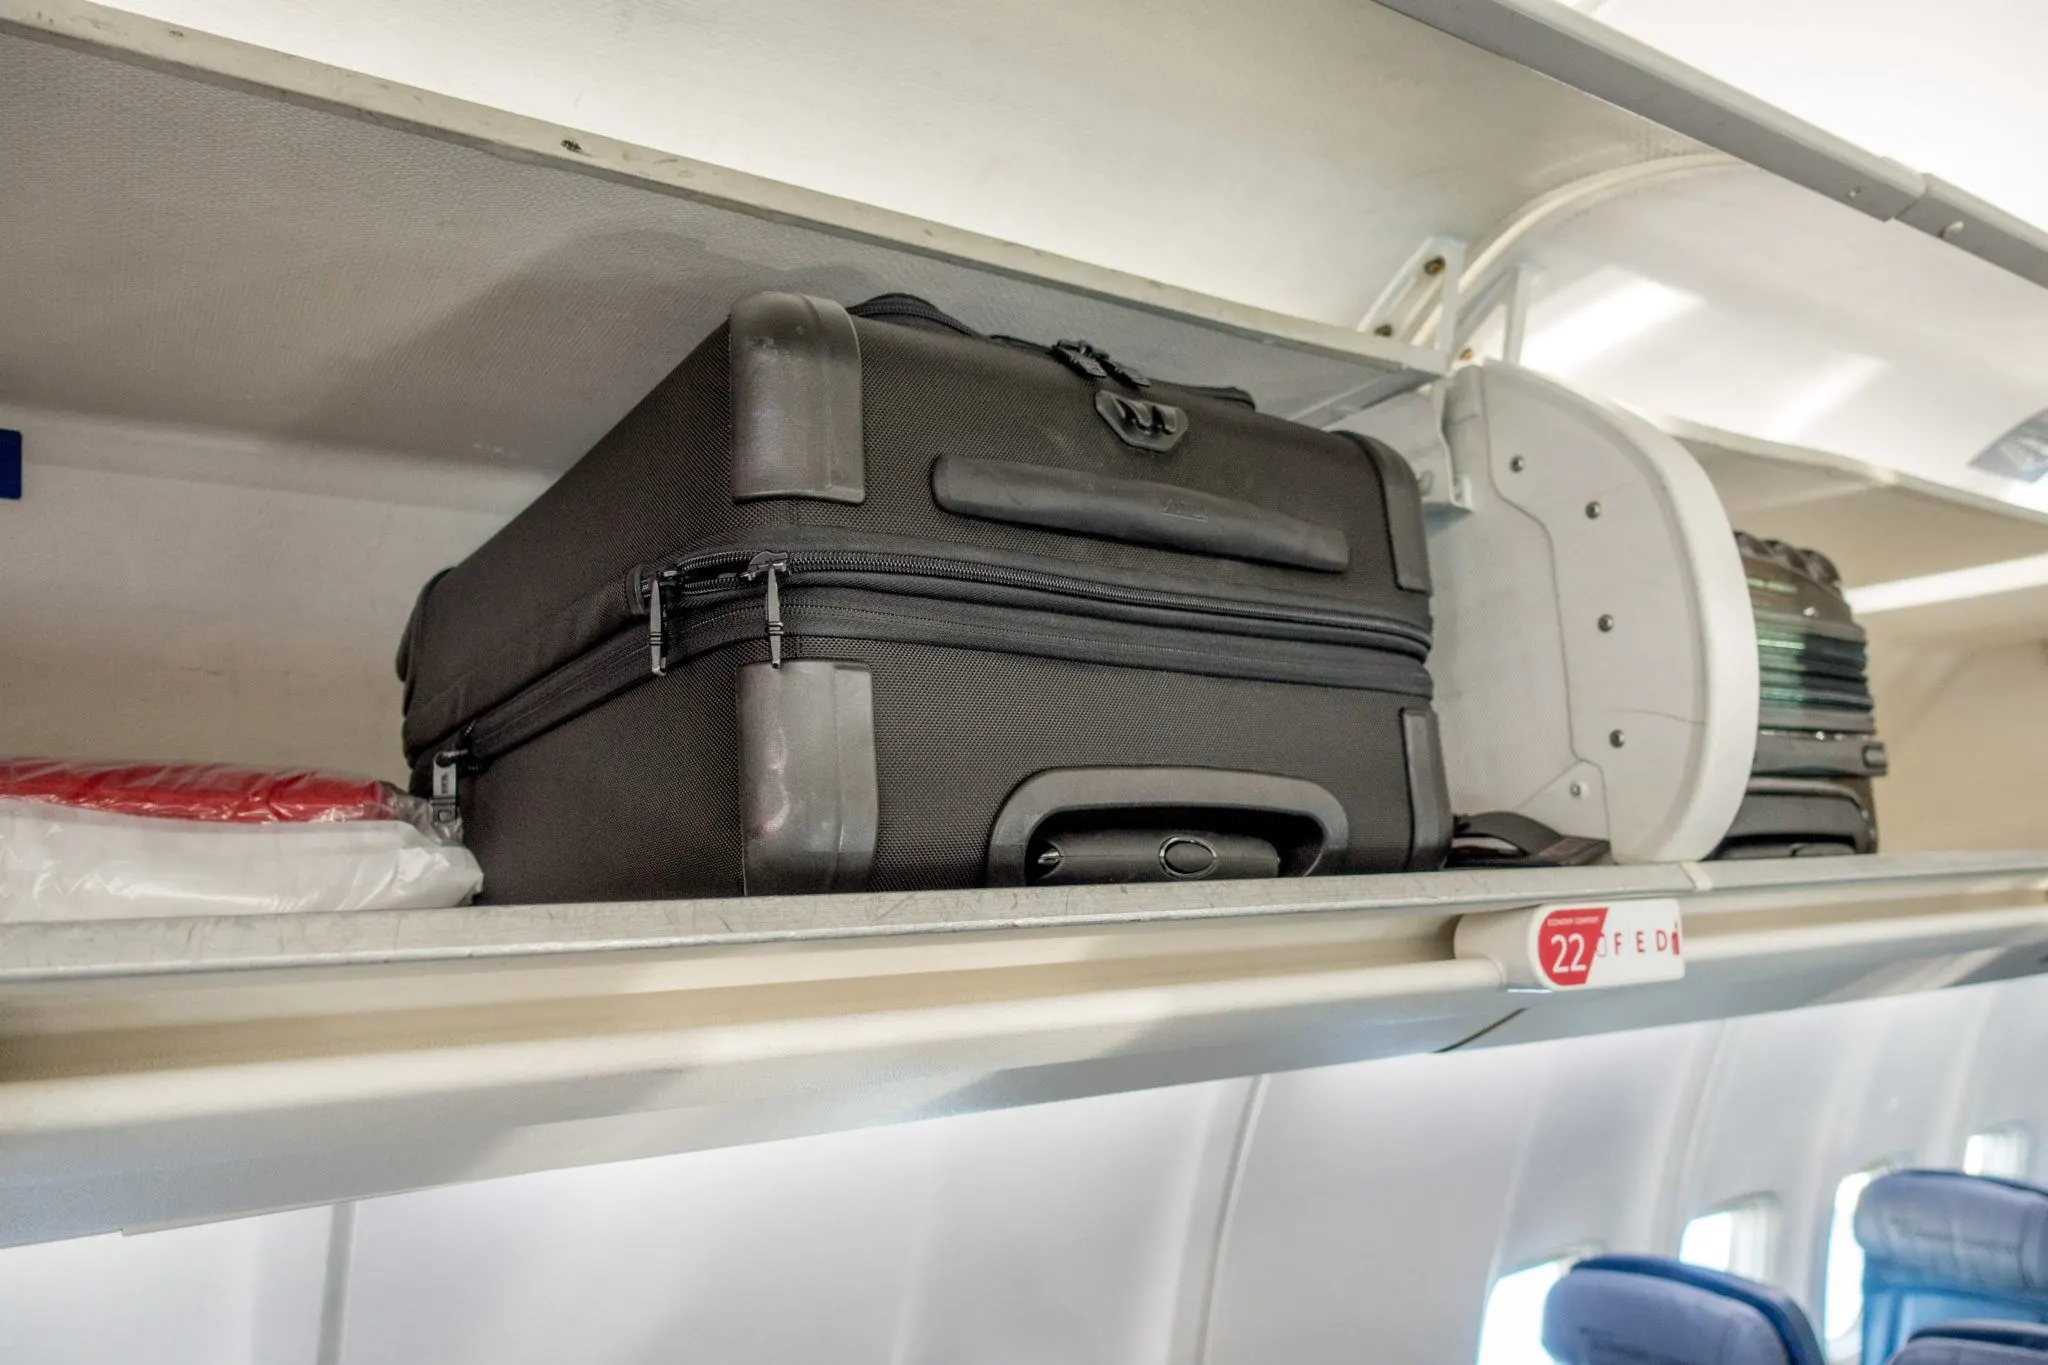 Two carry-on suitcases in an airline overhead bin